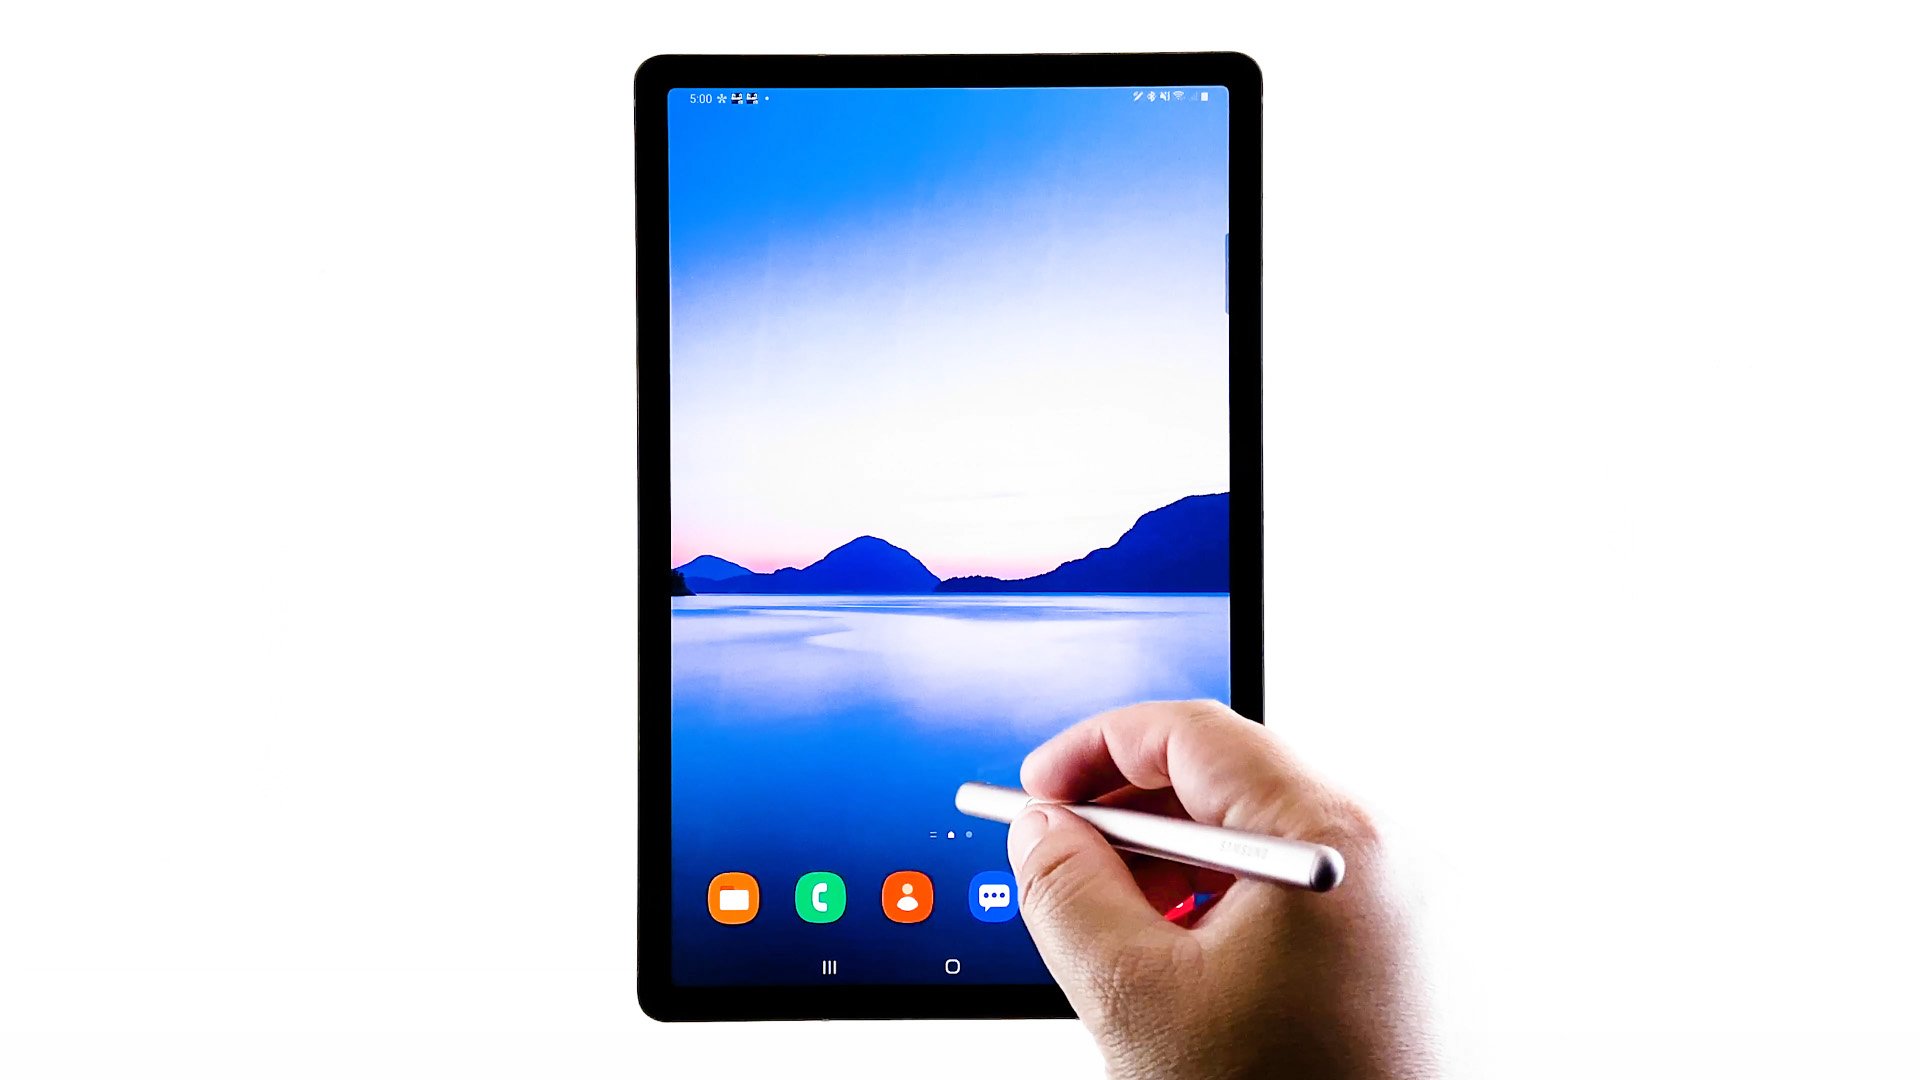 reset tab s6 samsung keyboard to defaults - home